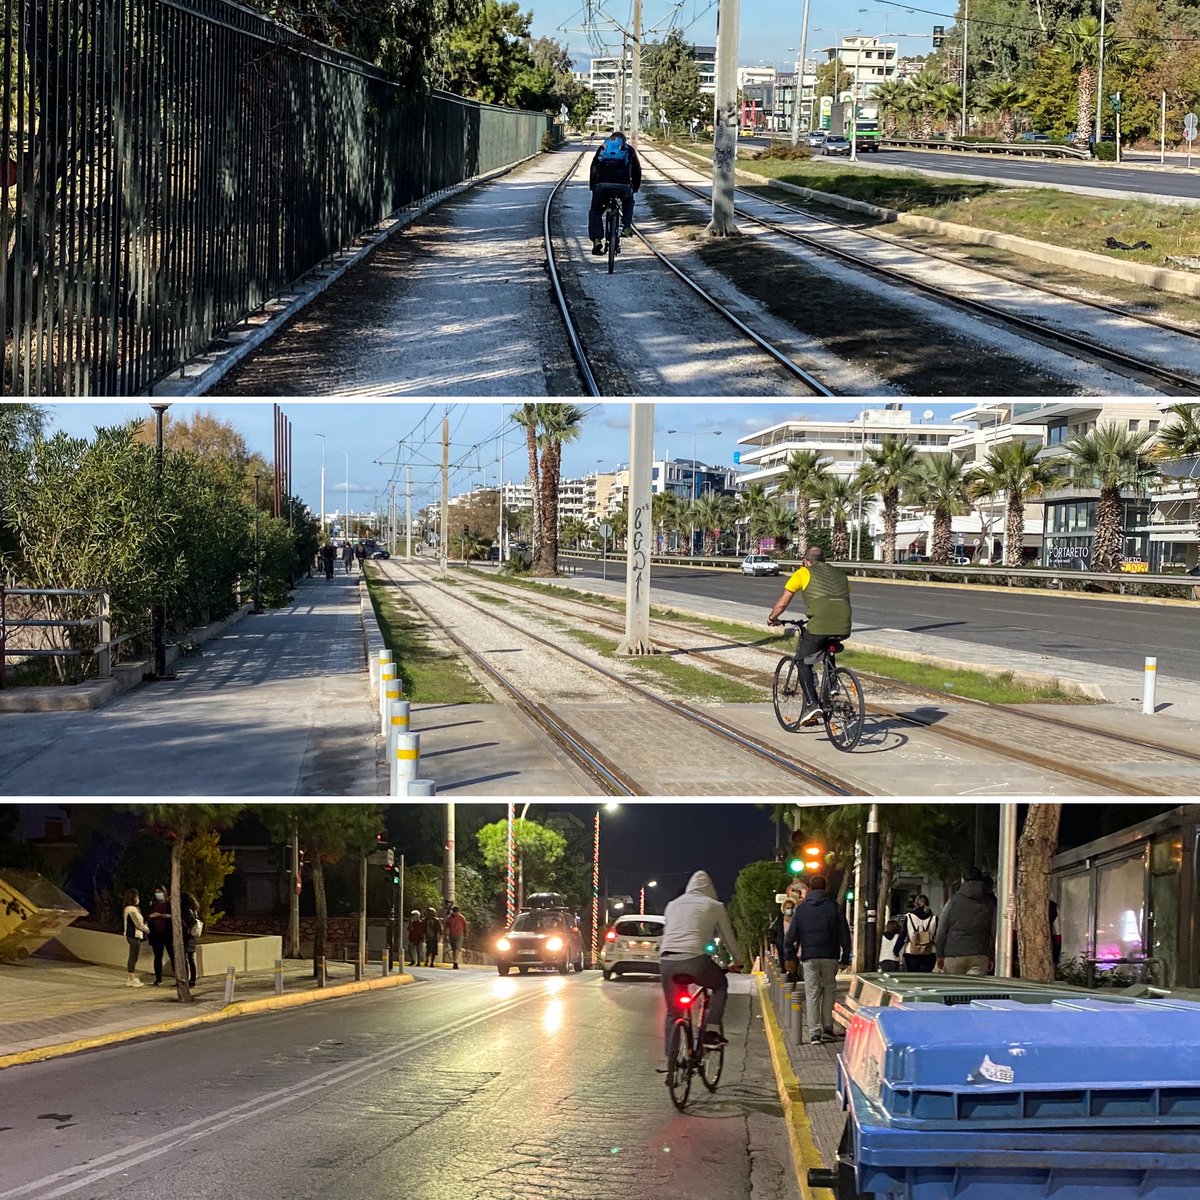 The indifference towards the pedestrian extends to every non-car user. I often saw bikers on the tram path—the only way to move seamlessly along the coast. Or they risked their lives to ride alongside cars. The bottom line is this: unless you’re in a car, get out of the way.